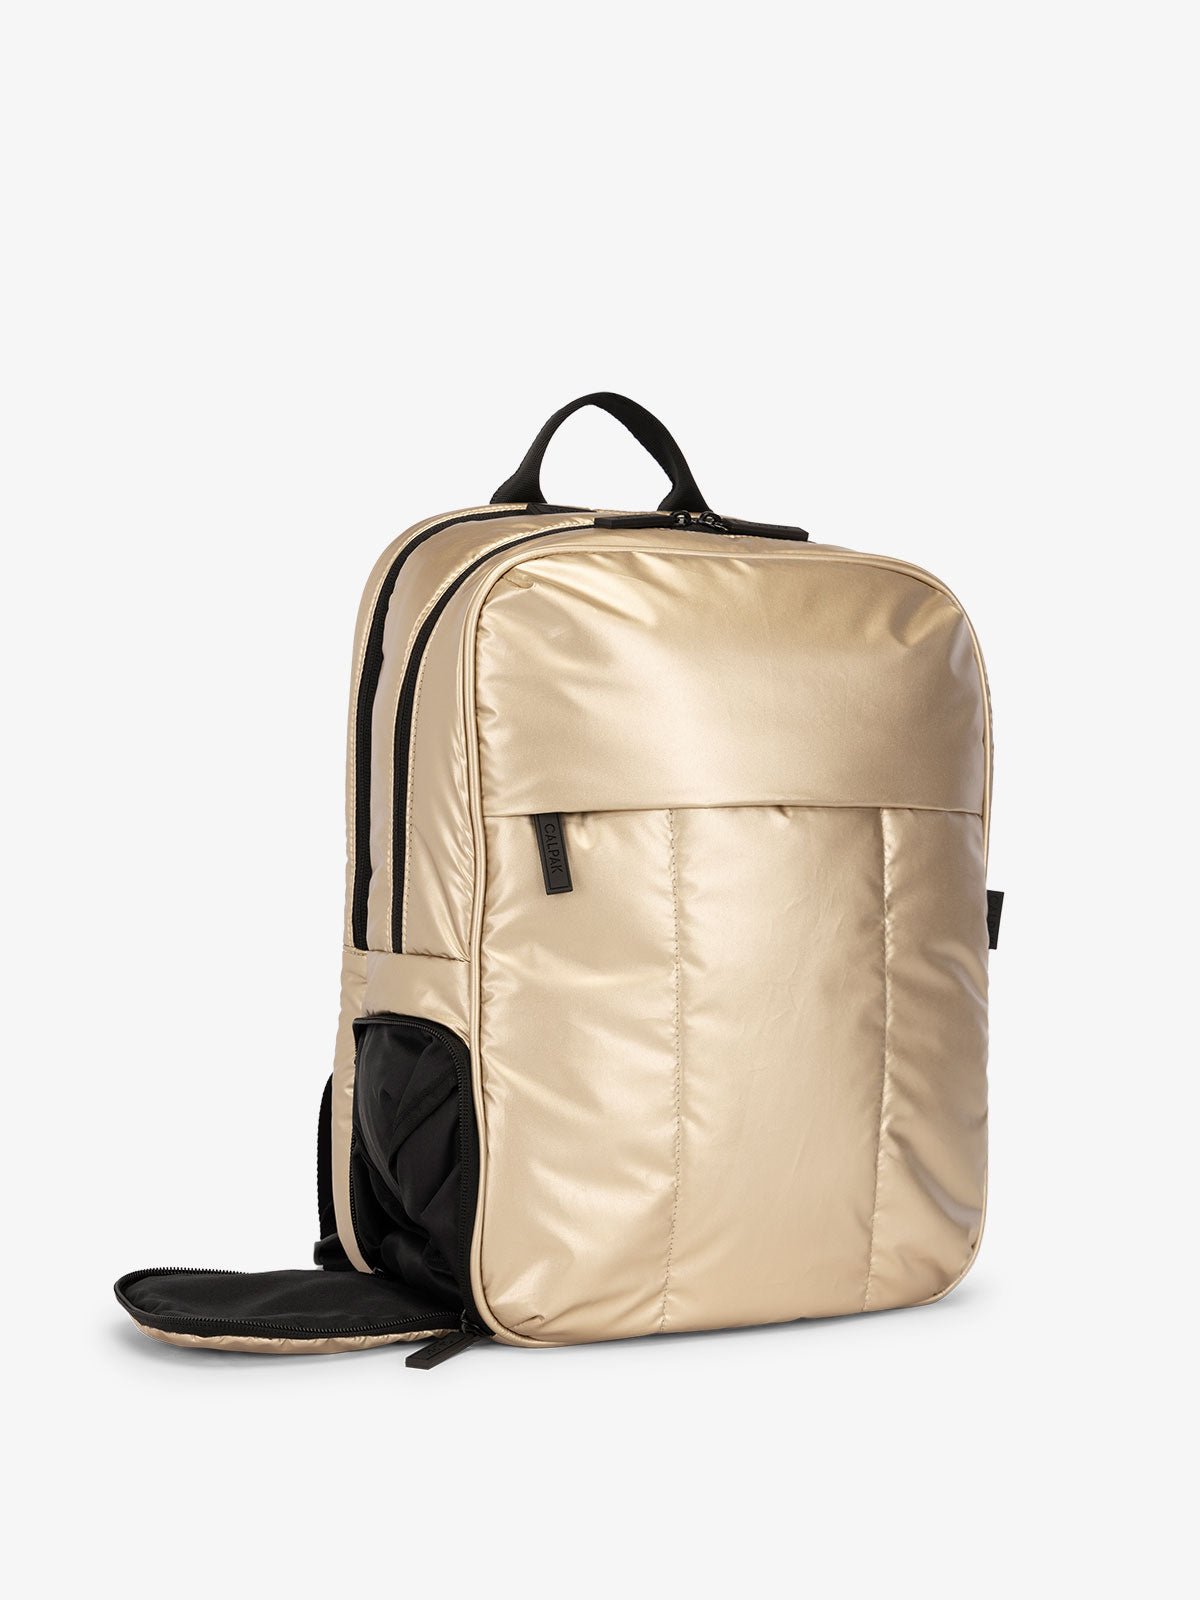 CALPAK Luka Laptop travel Backpack with shoe compartment in metallic gold